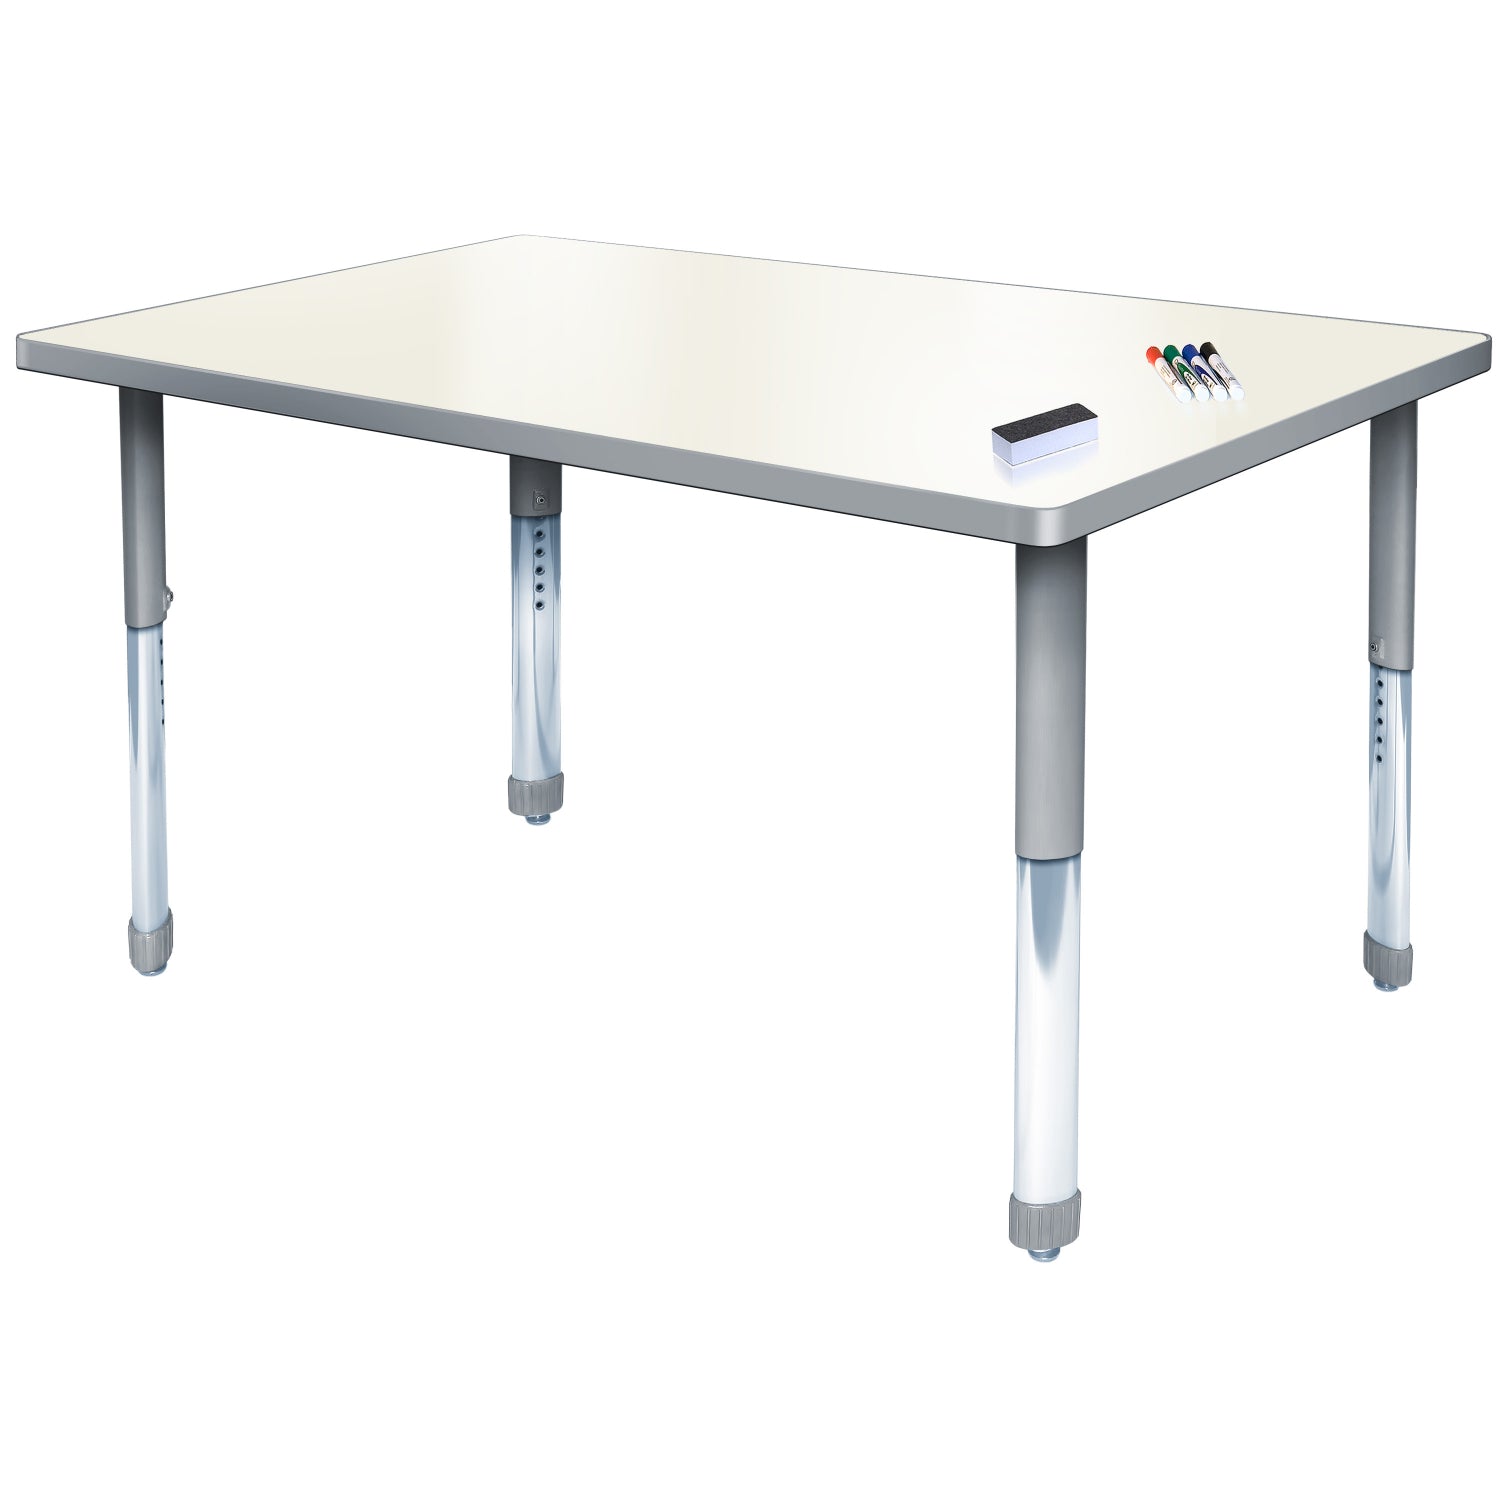 Aero Dry Erase Markerboard Activity Table, 24" x 36" Rectangle, Oval Adjustable Height Legs